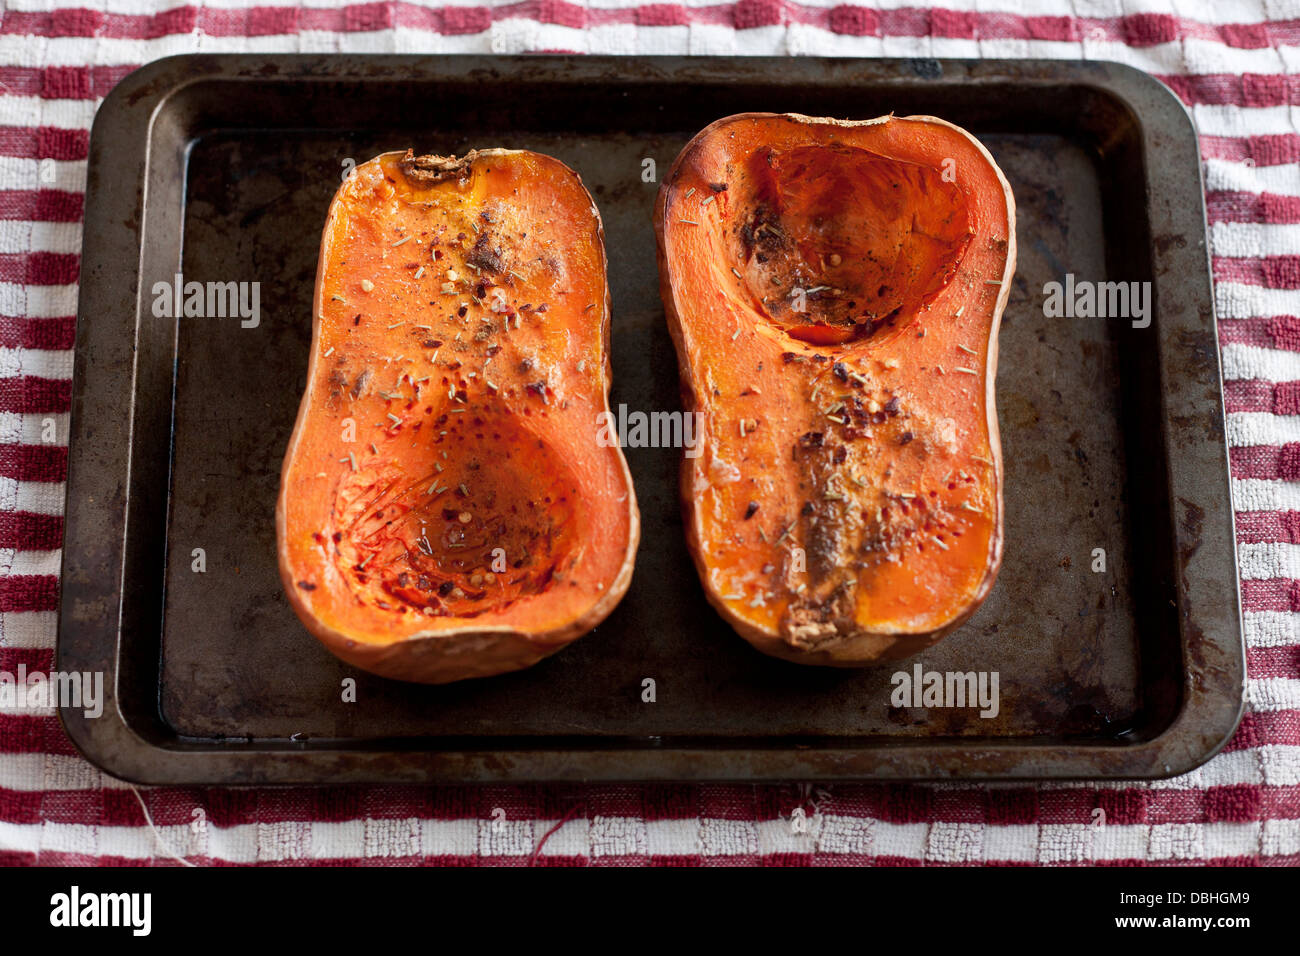 Cooked and seasoned butternut squash on a baking sheet, rustic delicious food. Stock Photo